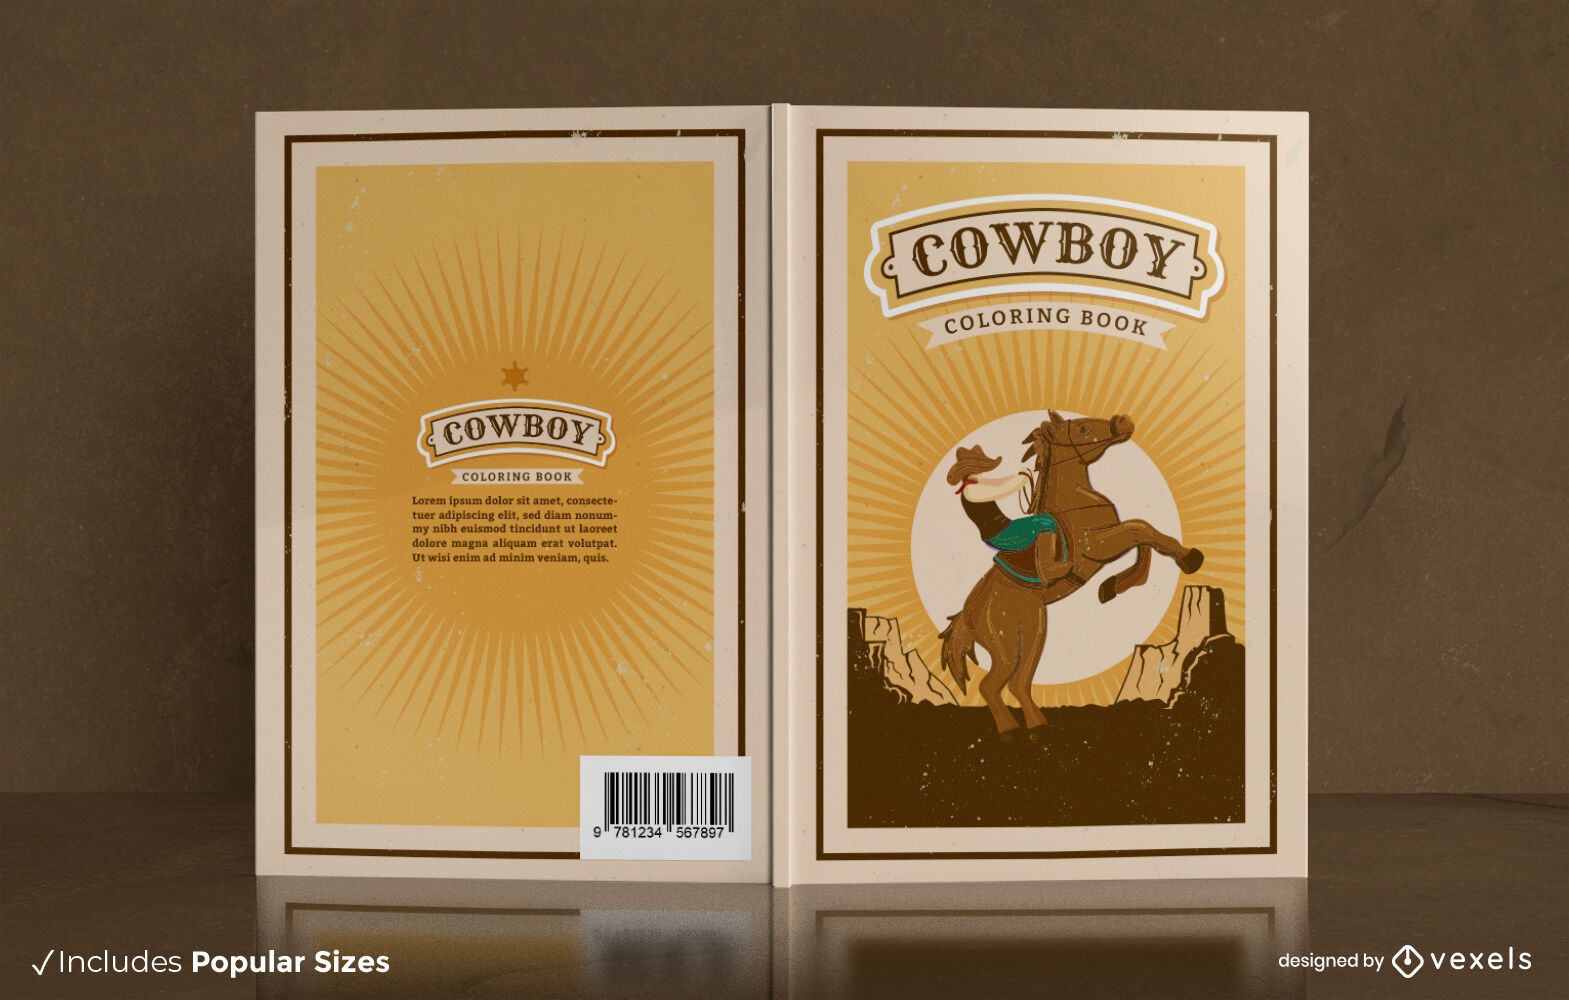 Cowboy sunset coloring book cover design